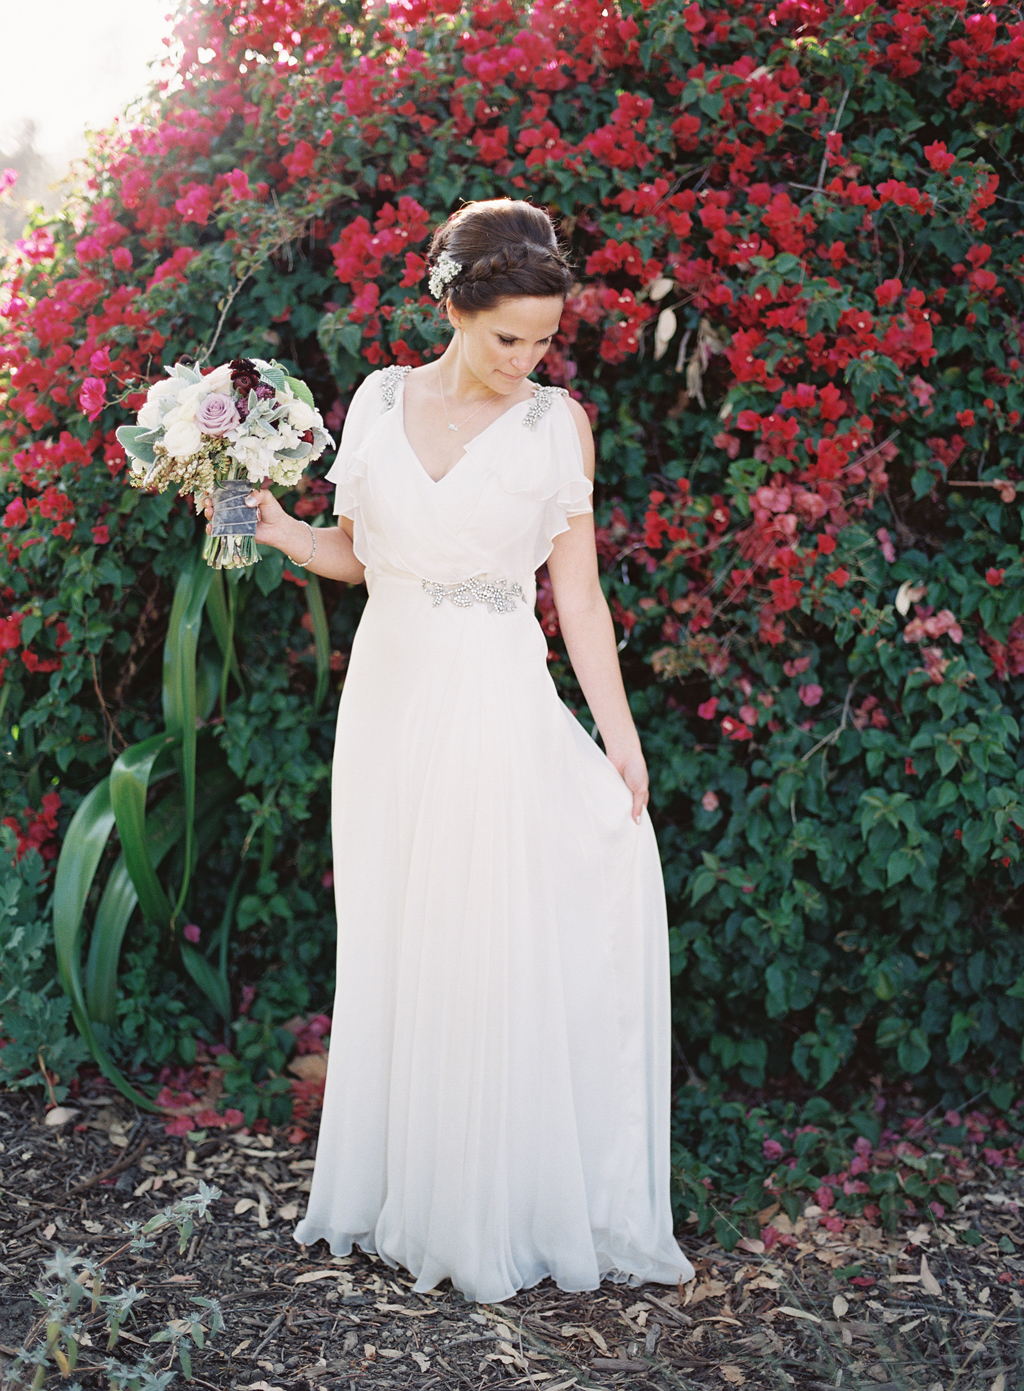 A southern california bride posing on her wedding day in Orange county